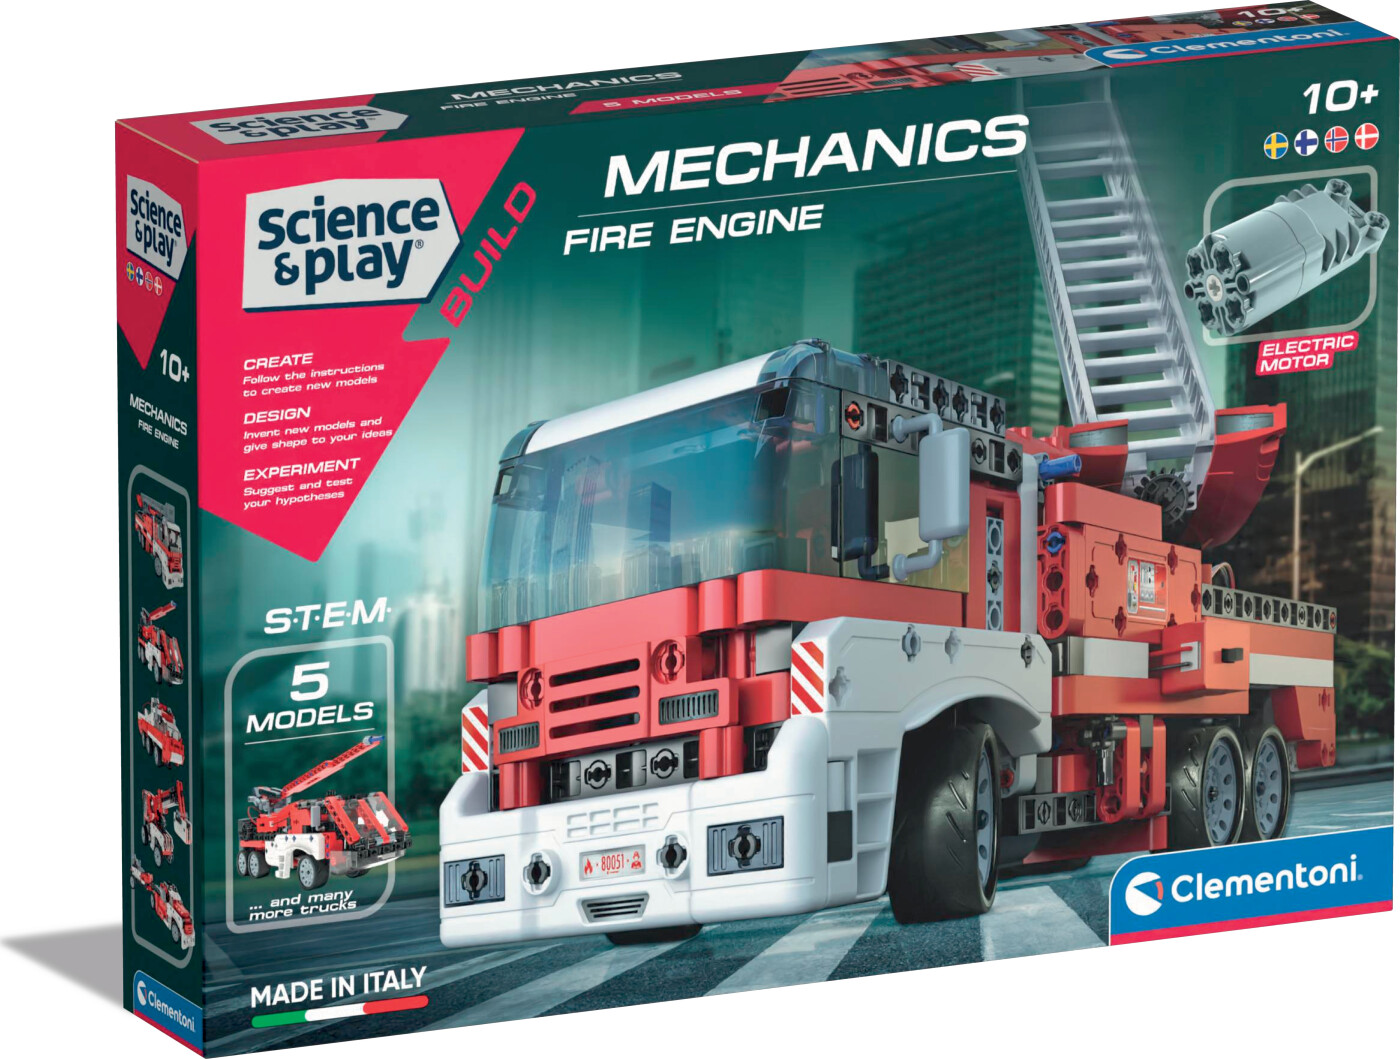 Se Clementoni - Science And Play Build - Mechanics - Fire Engine hos Gucca.dk